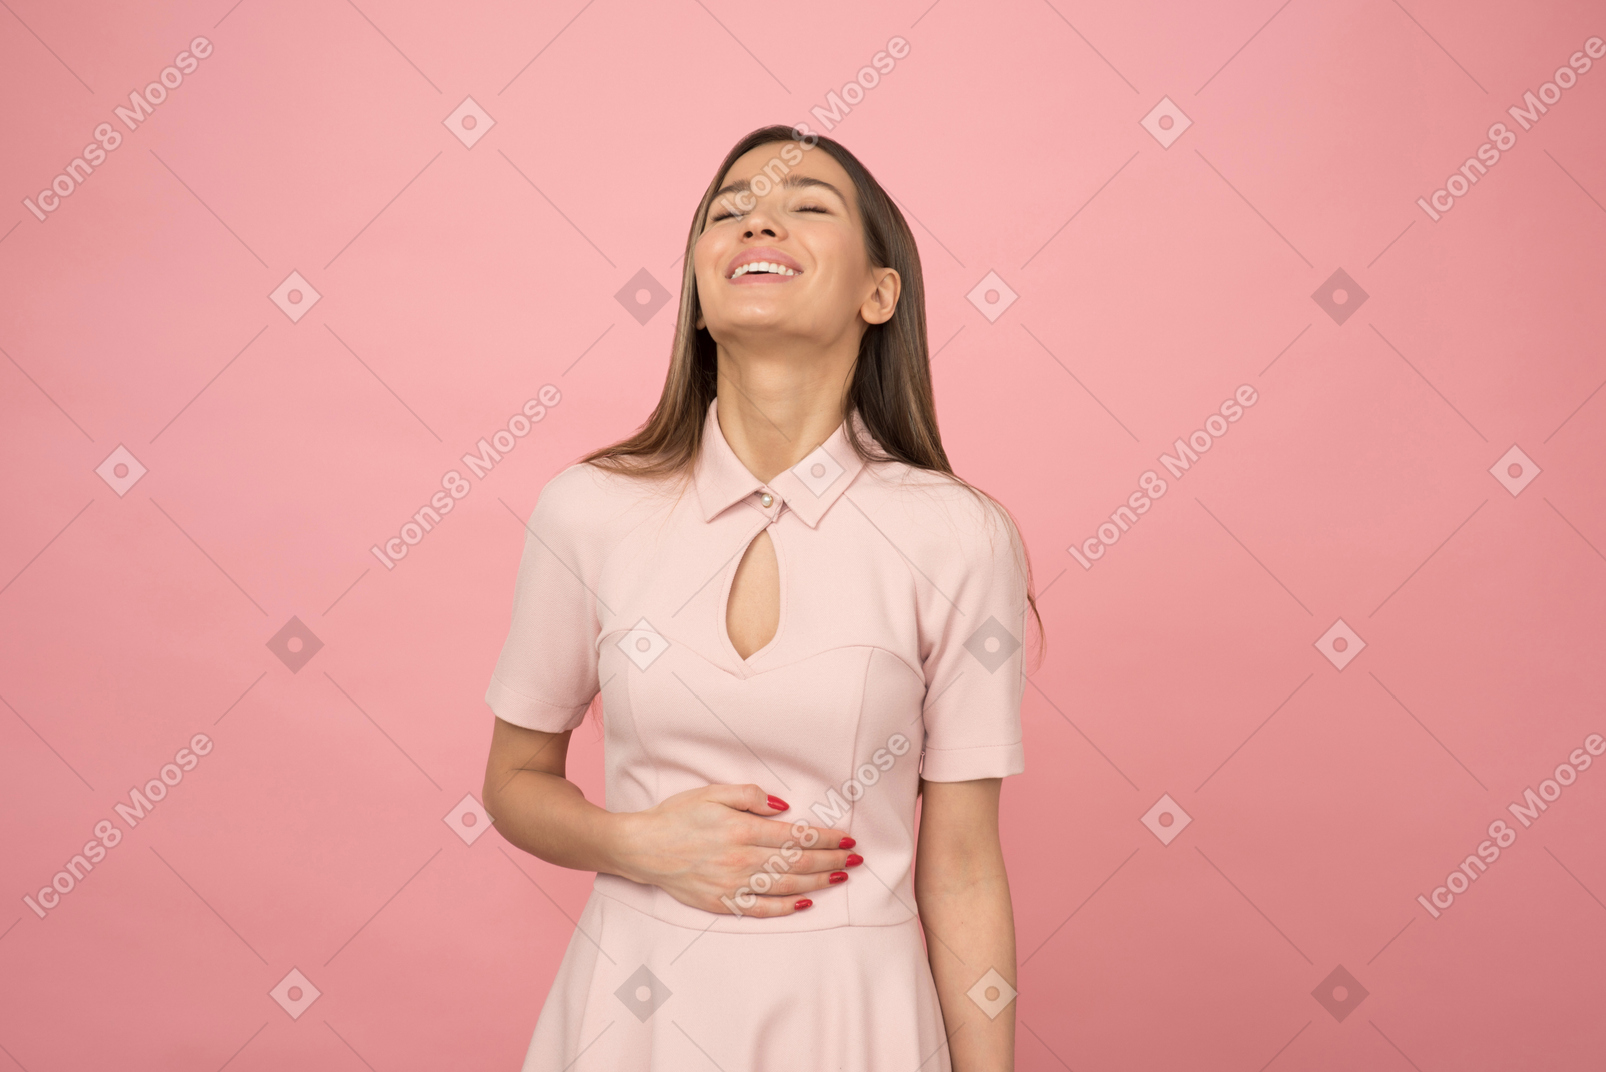 Girl holding her arm next to her belly